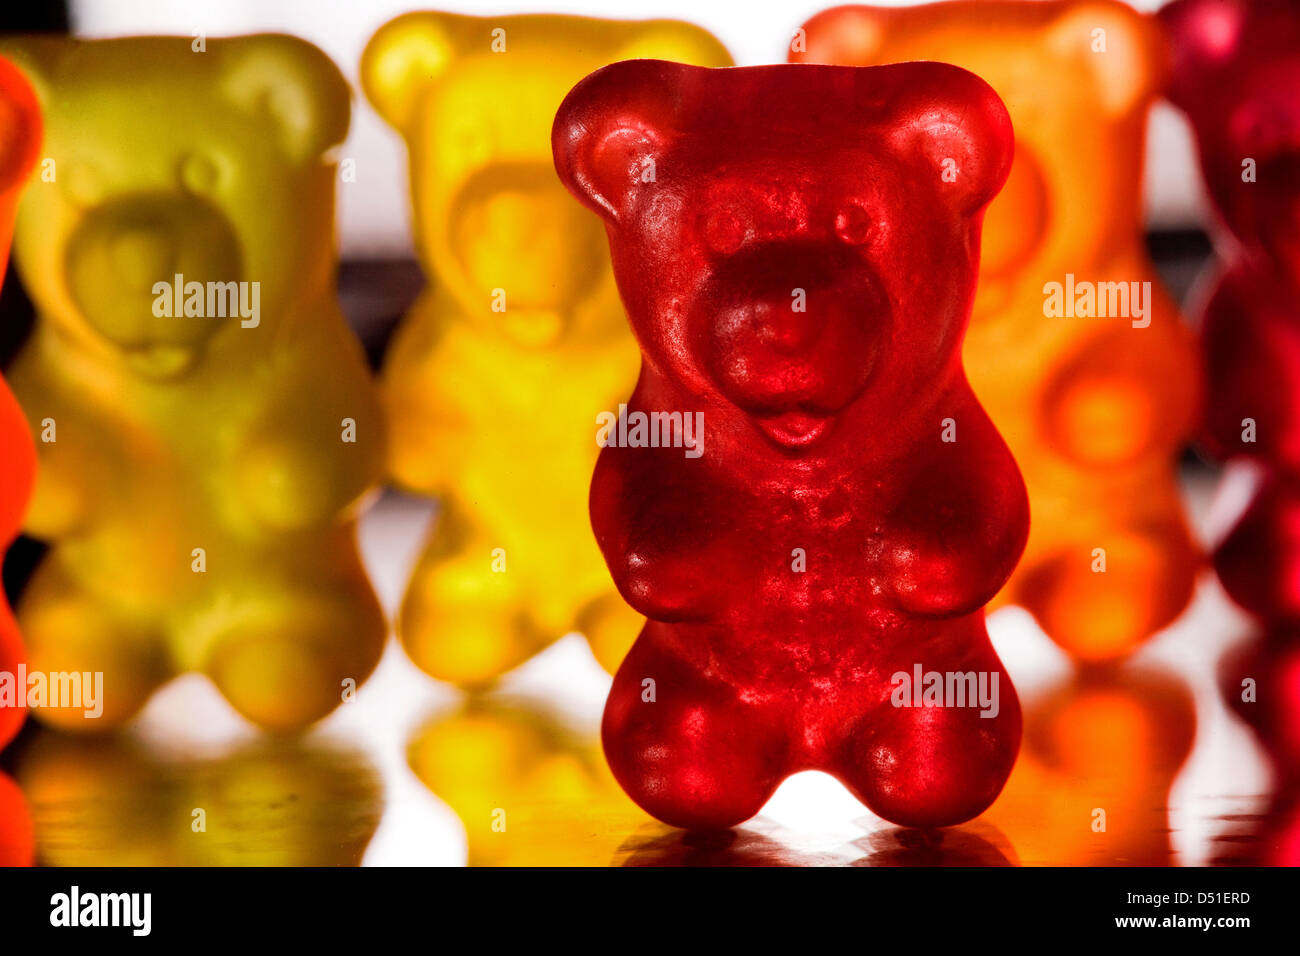 A file picture dated 25 April 2008 shows gummi bears at the -gummi Bear Factory in Boizenburg, Germany. Haribo has become a cult brand. Generations have grown up with their colourful gummi bears. The family enterprise from Bonn, Germany has managed to be timelessly up-to-date over decades. Hundreds of millions of gummi bears are produced daily. Haribo will celebrate their 90th anni Stock Photo